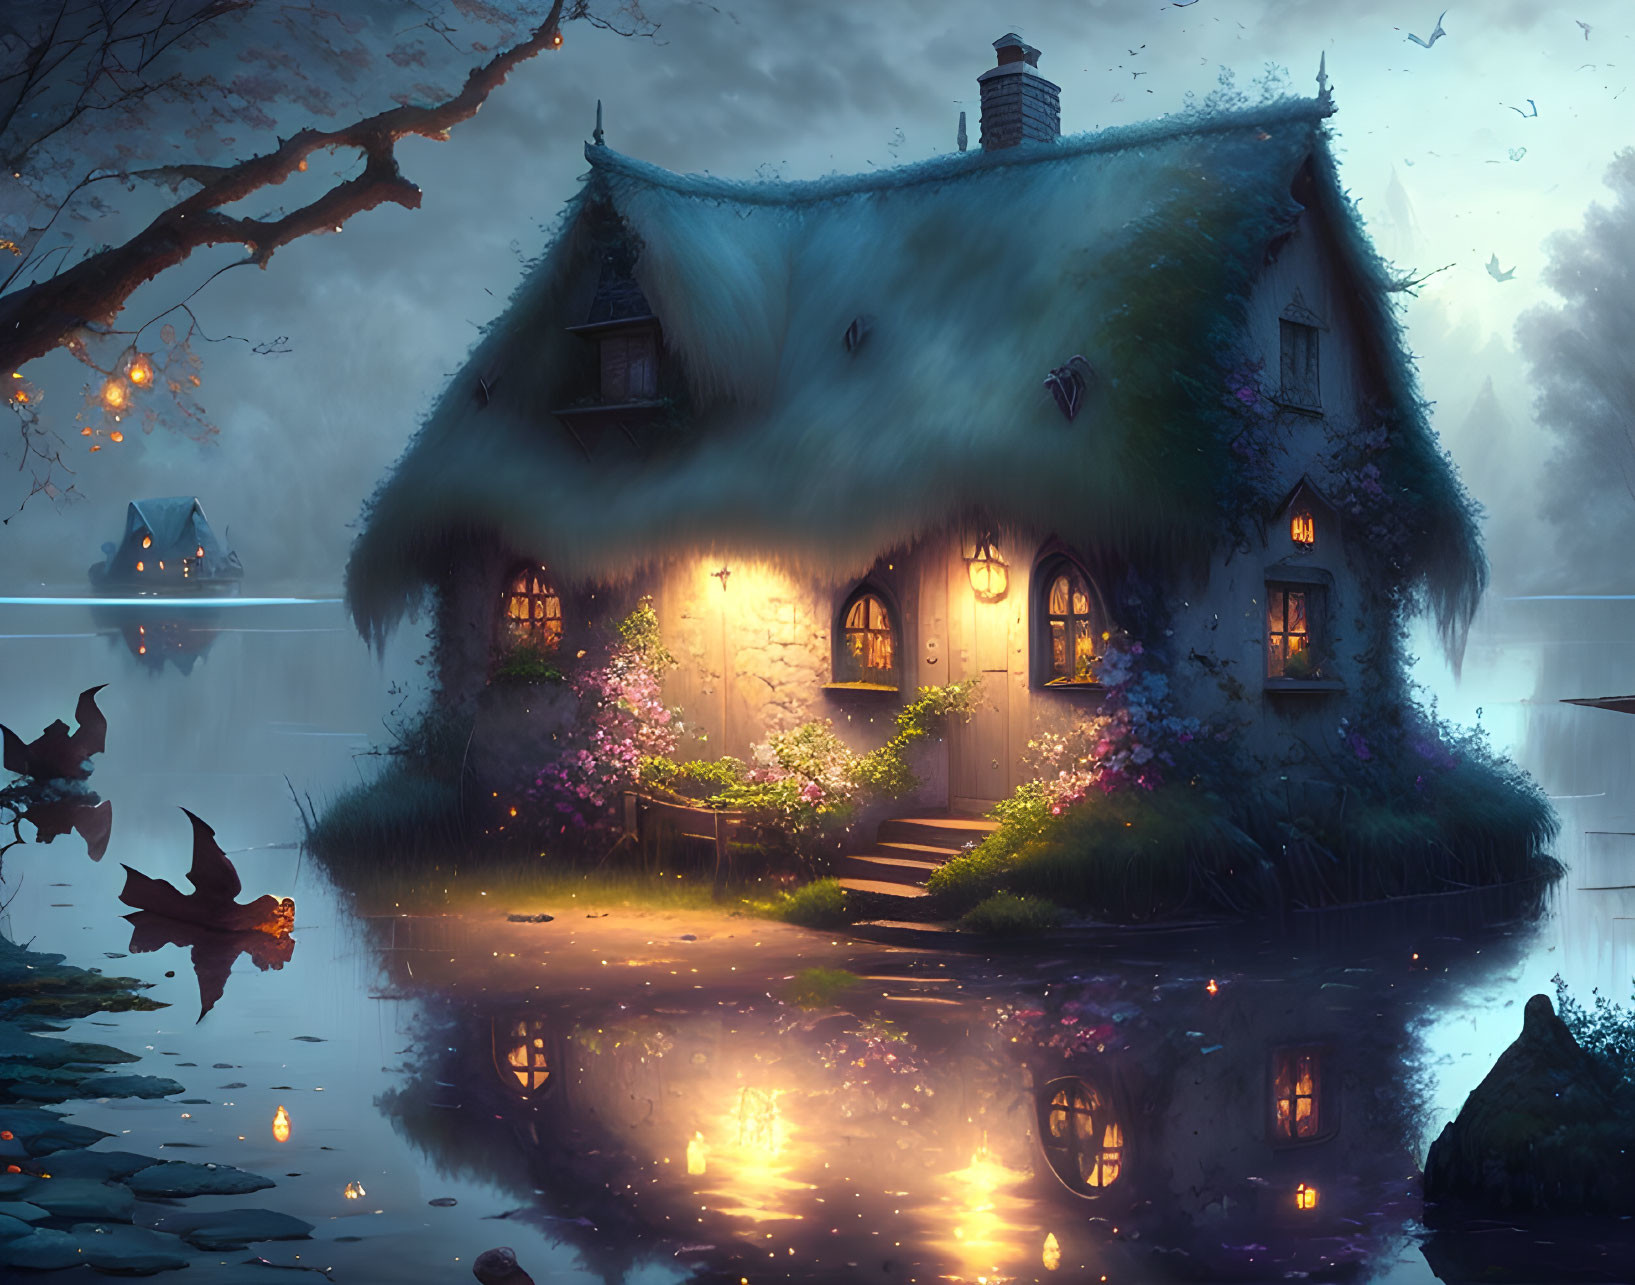 Thatched cottage by tranquil lakeside at twilight